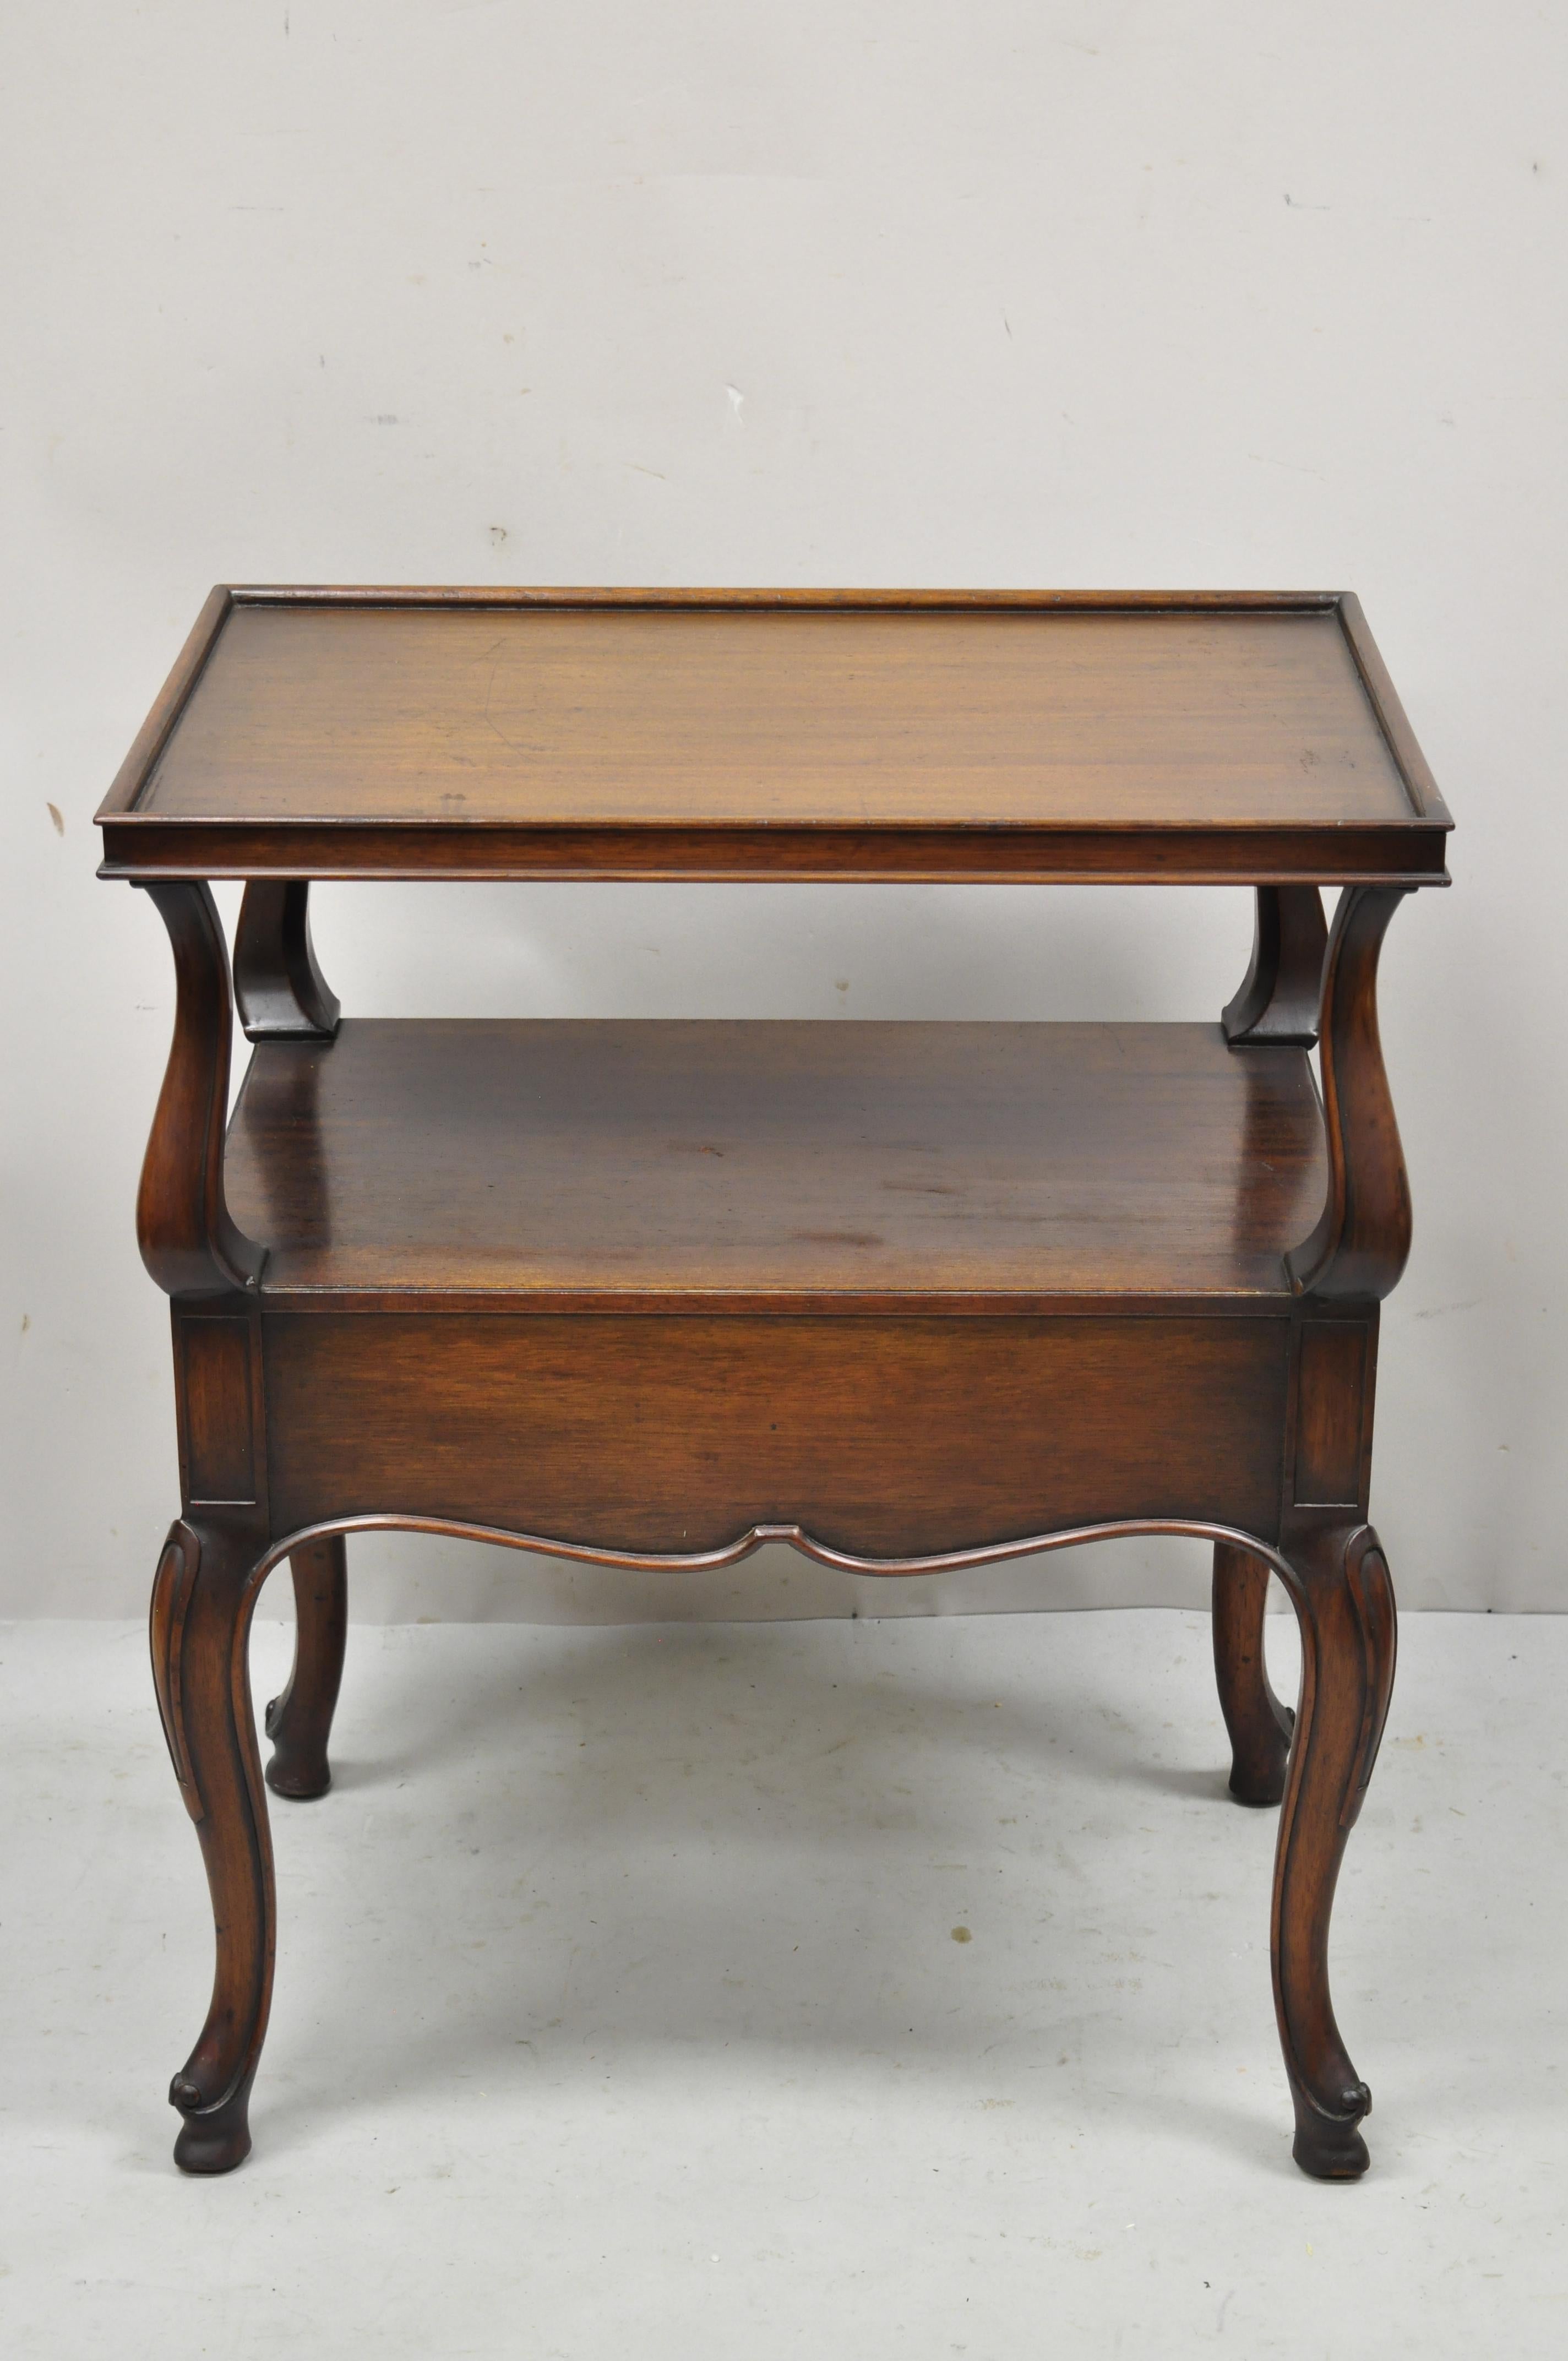 North American Vintage French Regency Banded Walnut One Drawer Lamp Table End Side Table